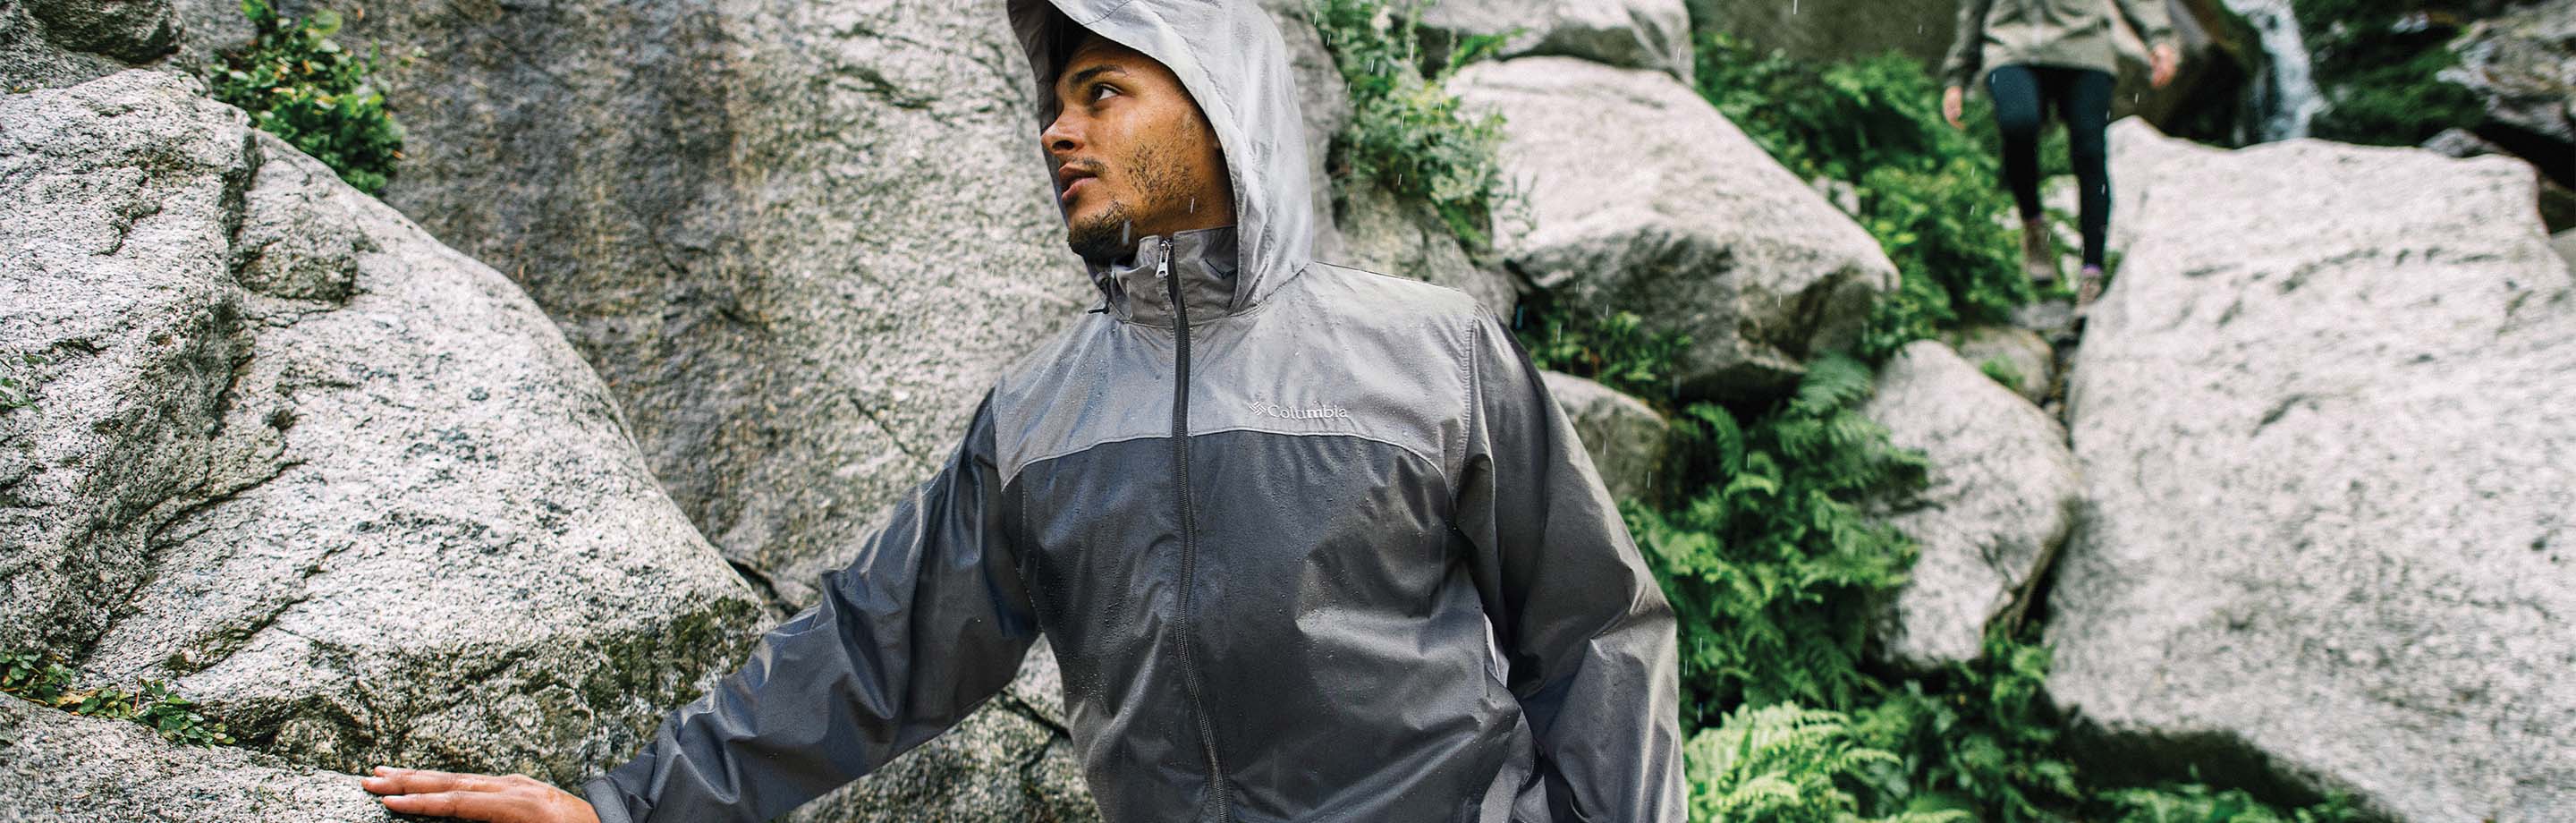 Columbia – Outdoor and rain wear in the Bike24 online shop